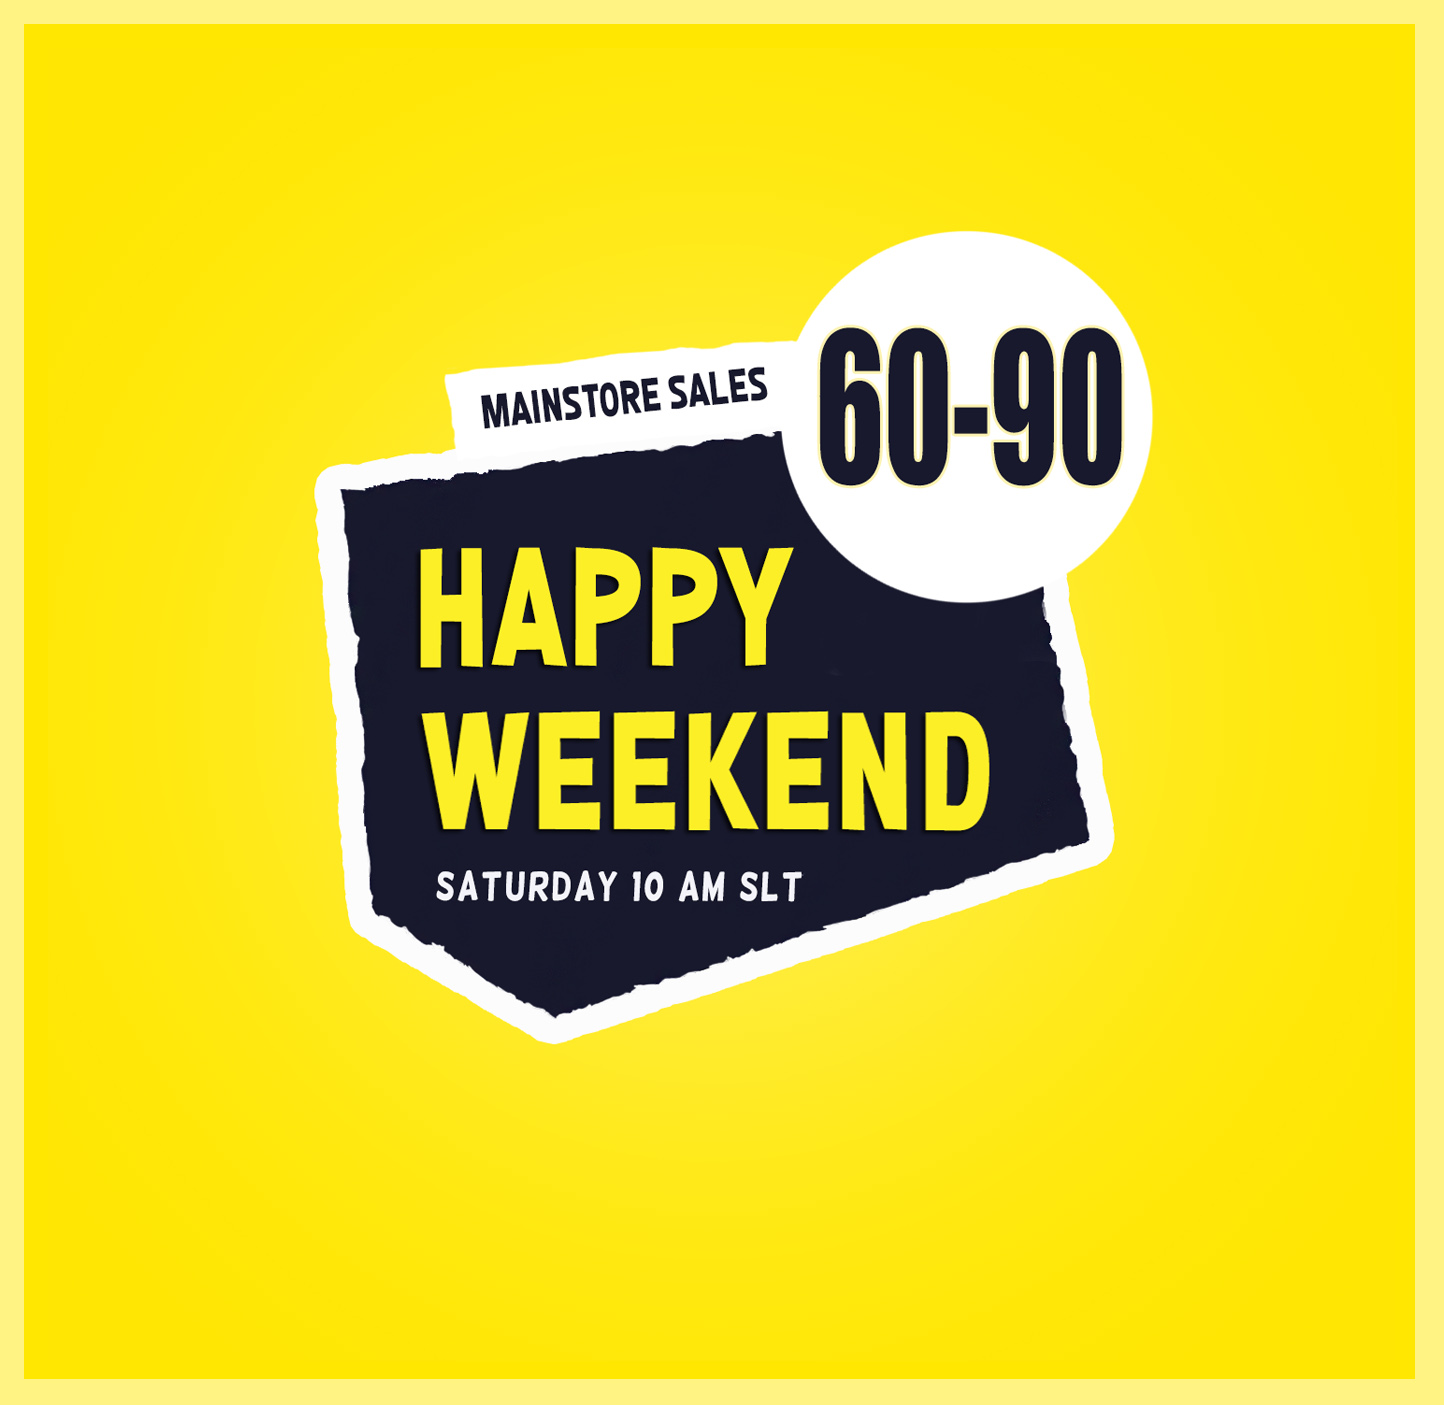 SALE-ABRATE THE WEEKEND WITH THE HAPPY WEEKEND SALE!